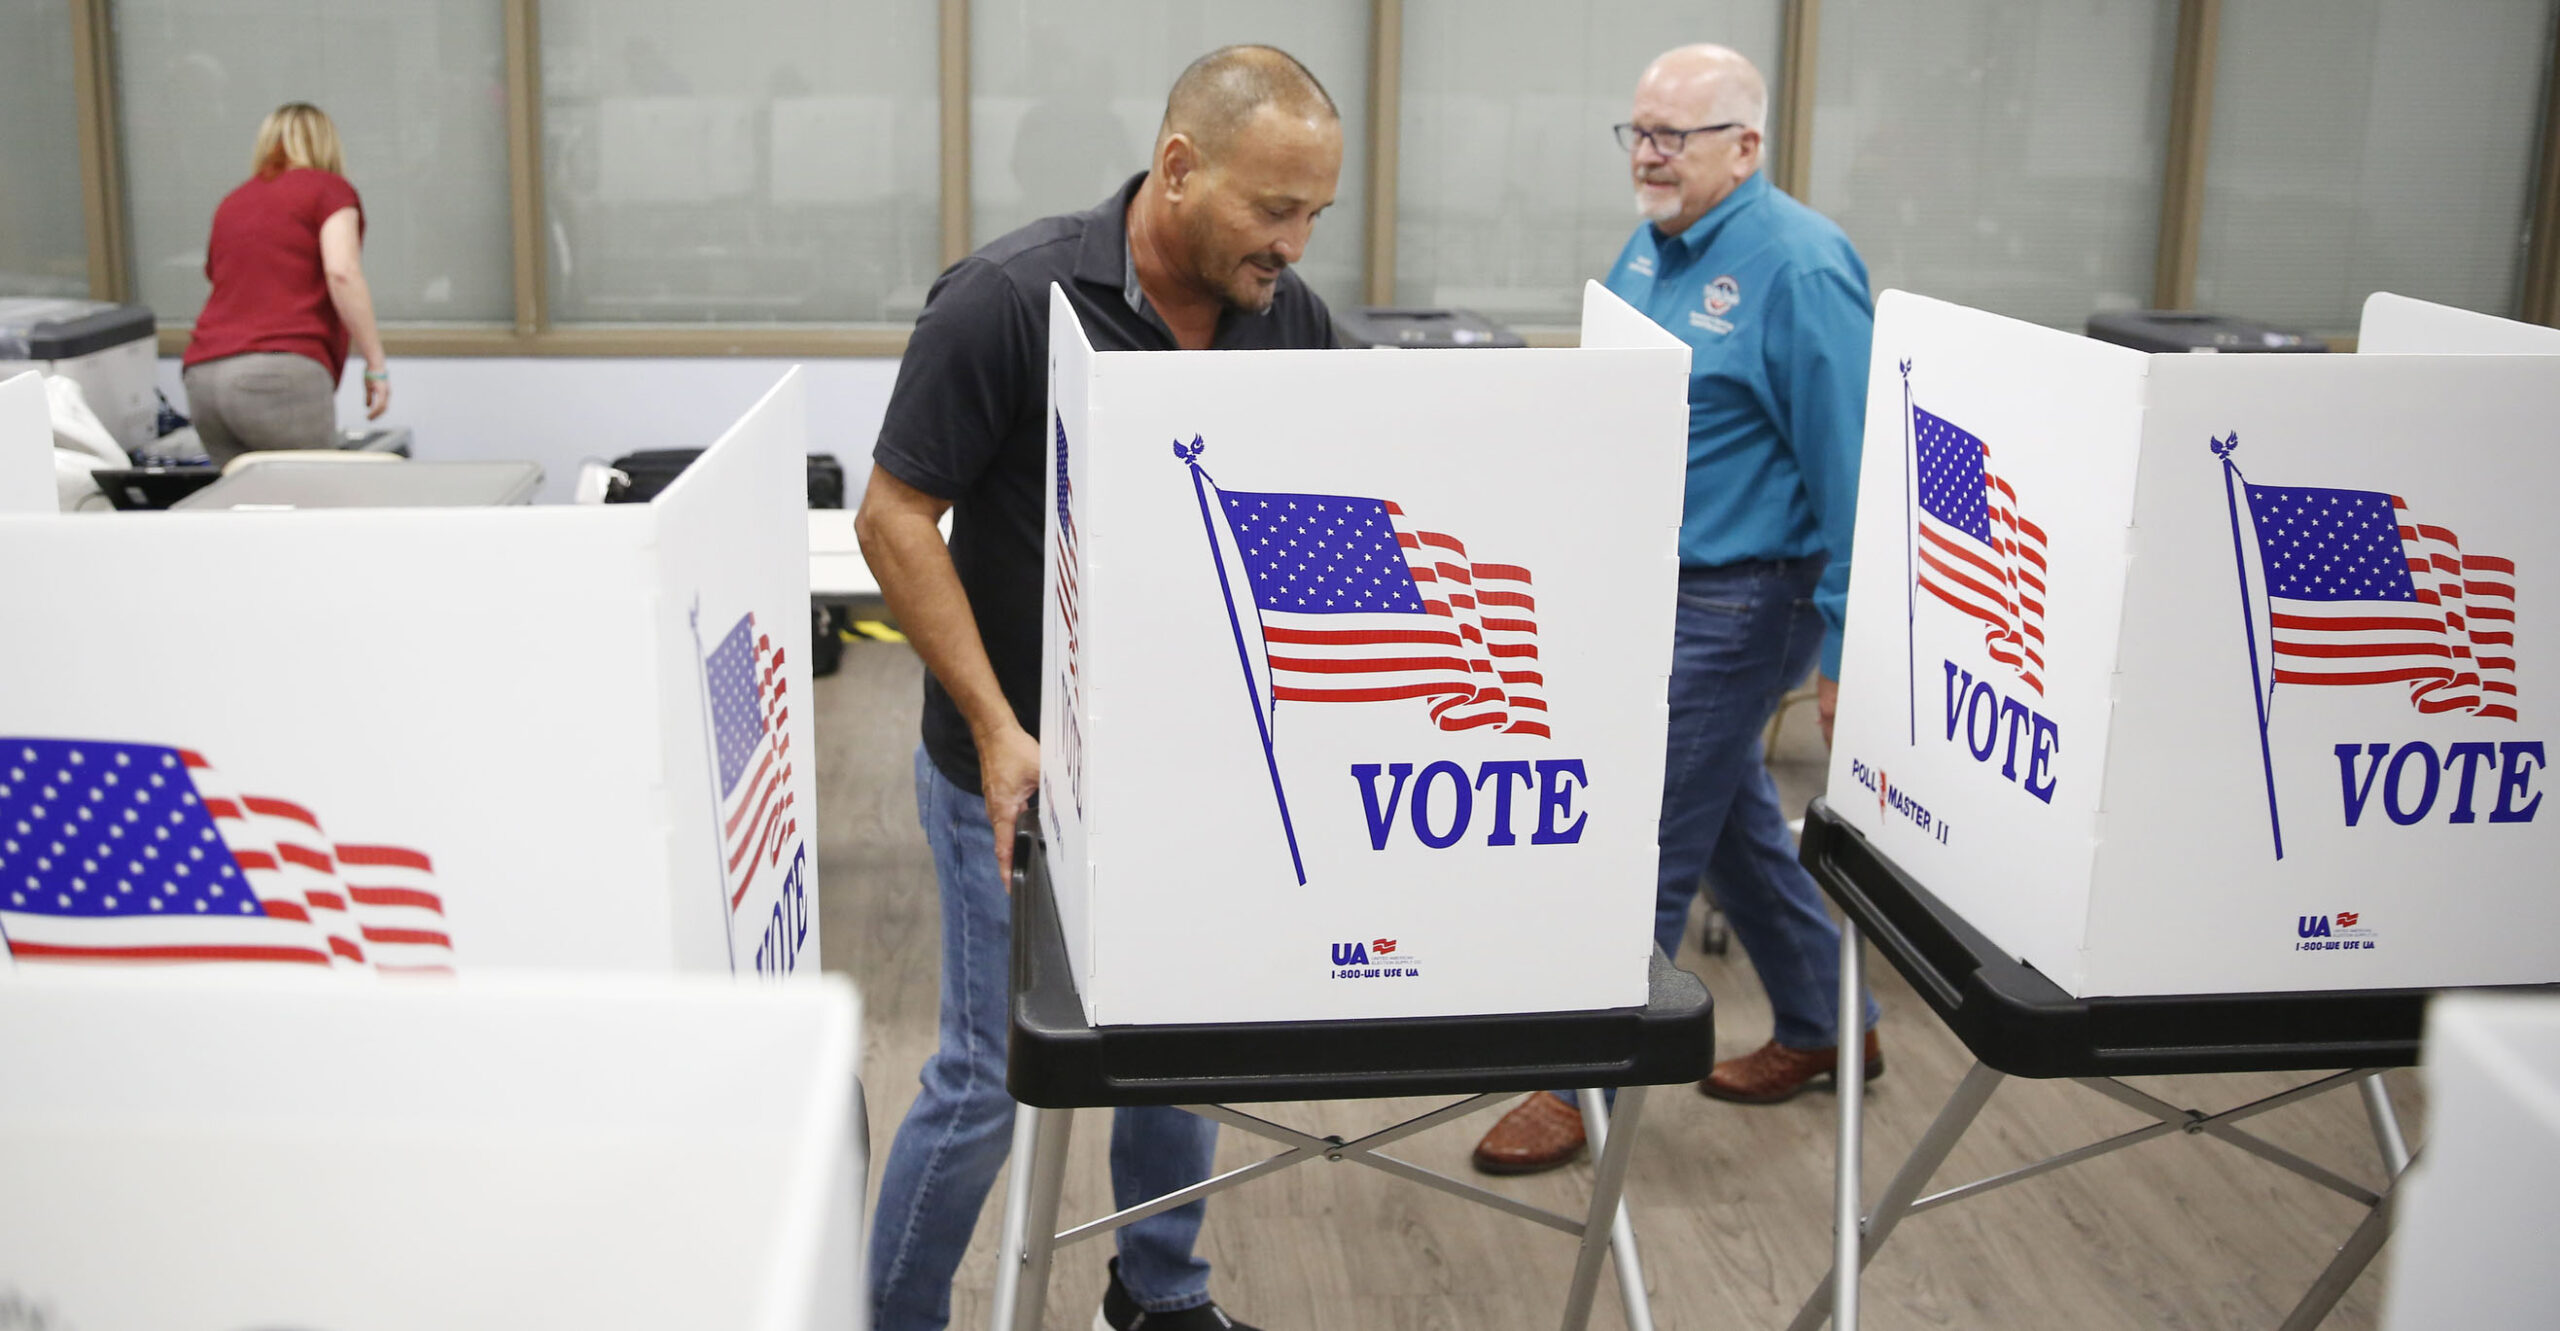 4 Takeaways as House Looks to Restore Confidence in Elections